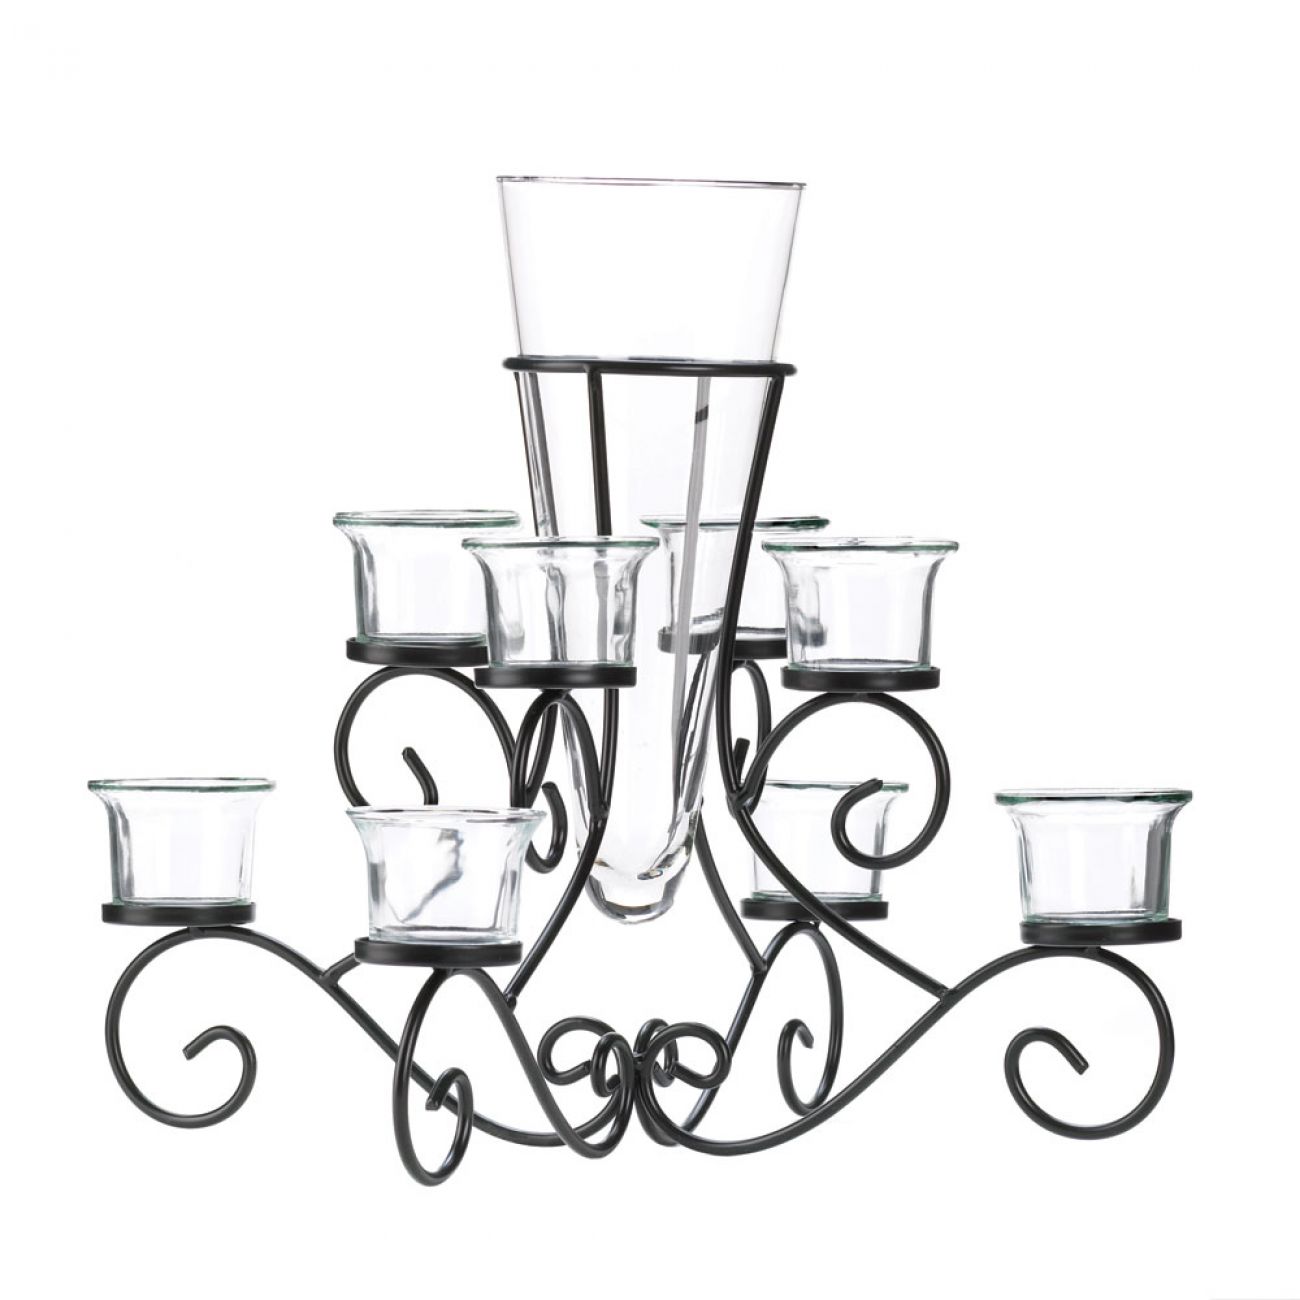 Scrollwork Candle Stand Centerpiece Vase